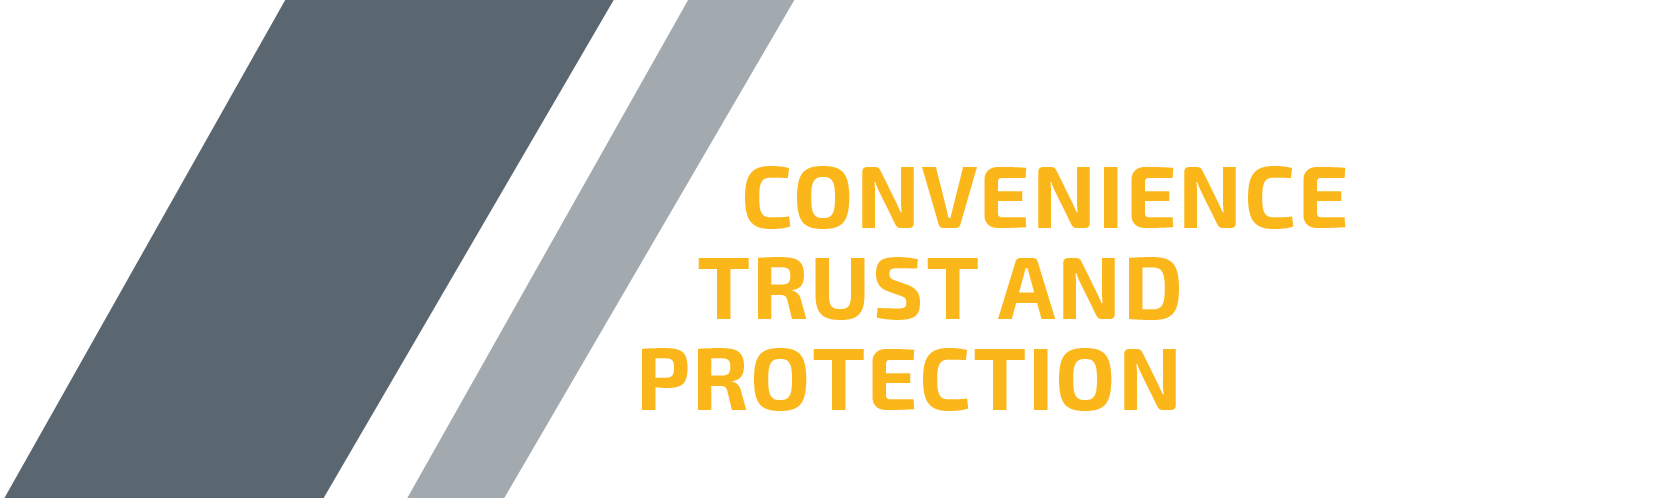 image says "Convenience trust and protection"